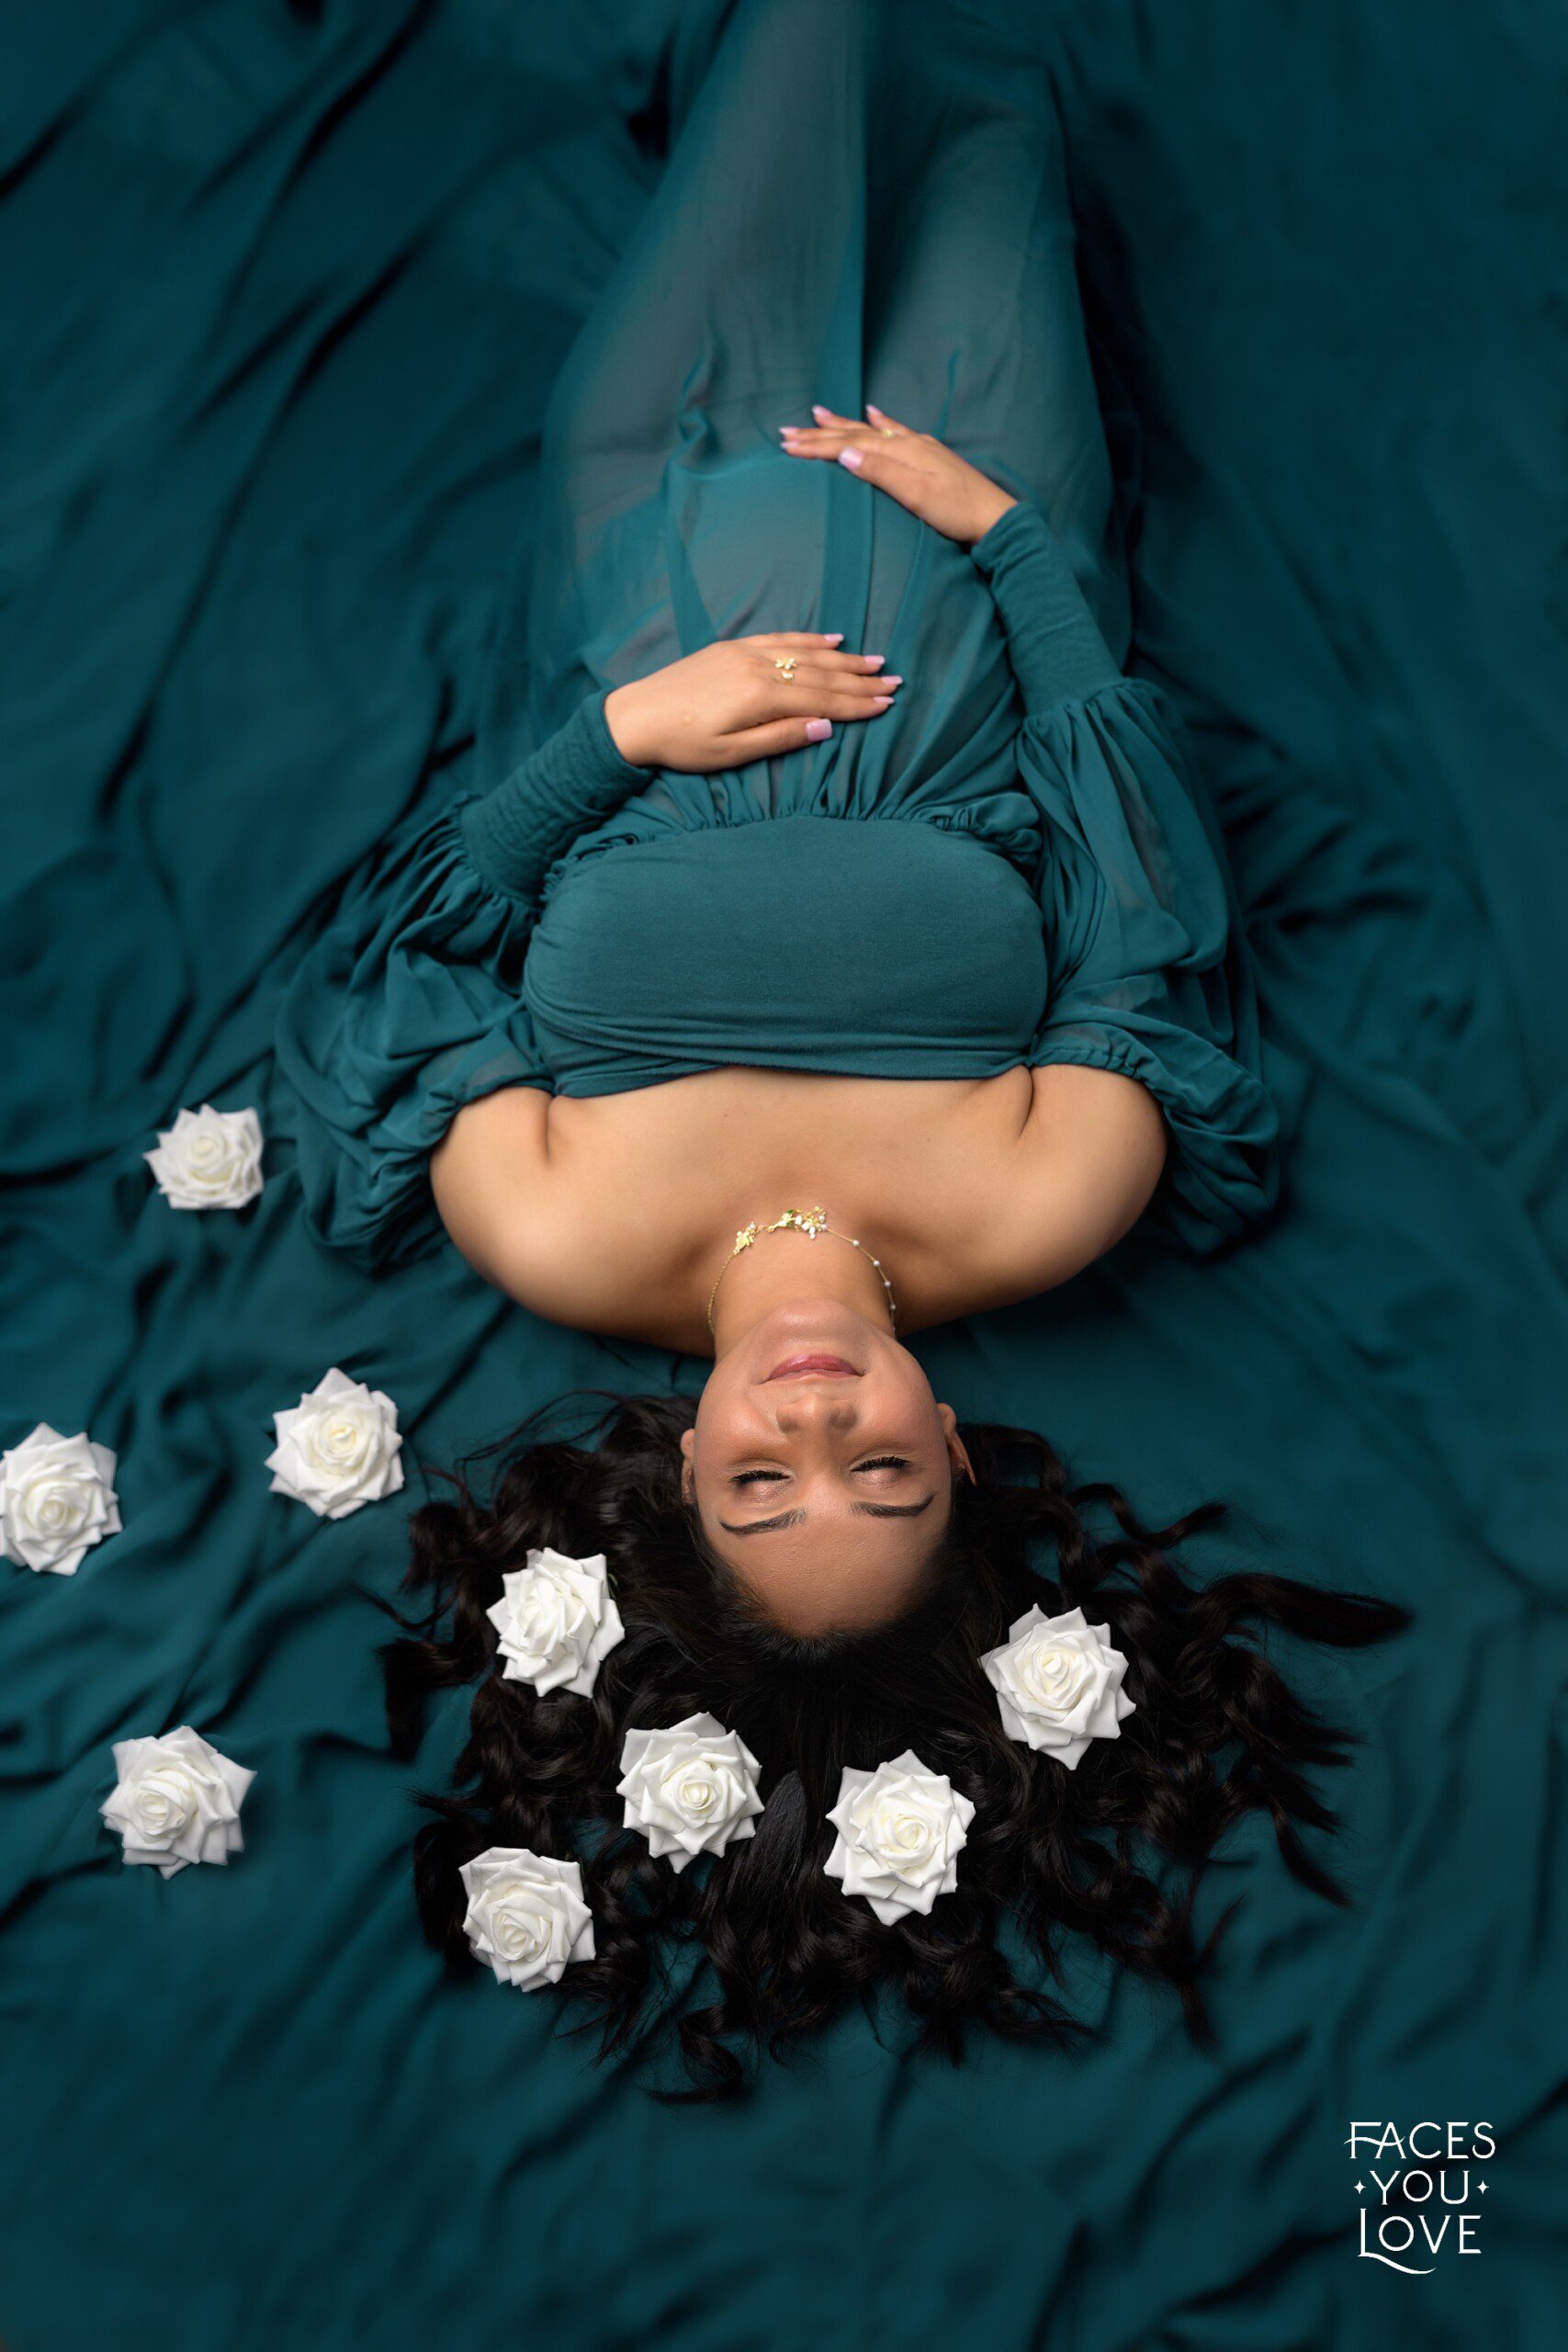 Overhead female maternity photograph, captured on a green background. She's wearing a flowy, green gown with white flowers in her hair. Photographed at Faces You Love studio in Overland Park.